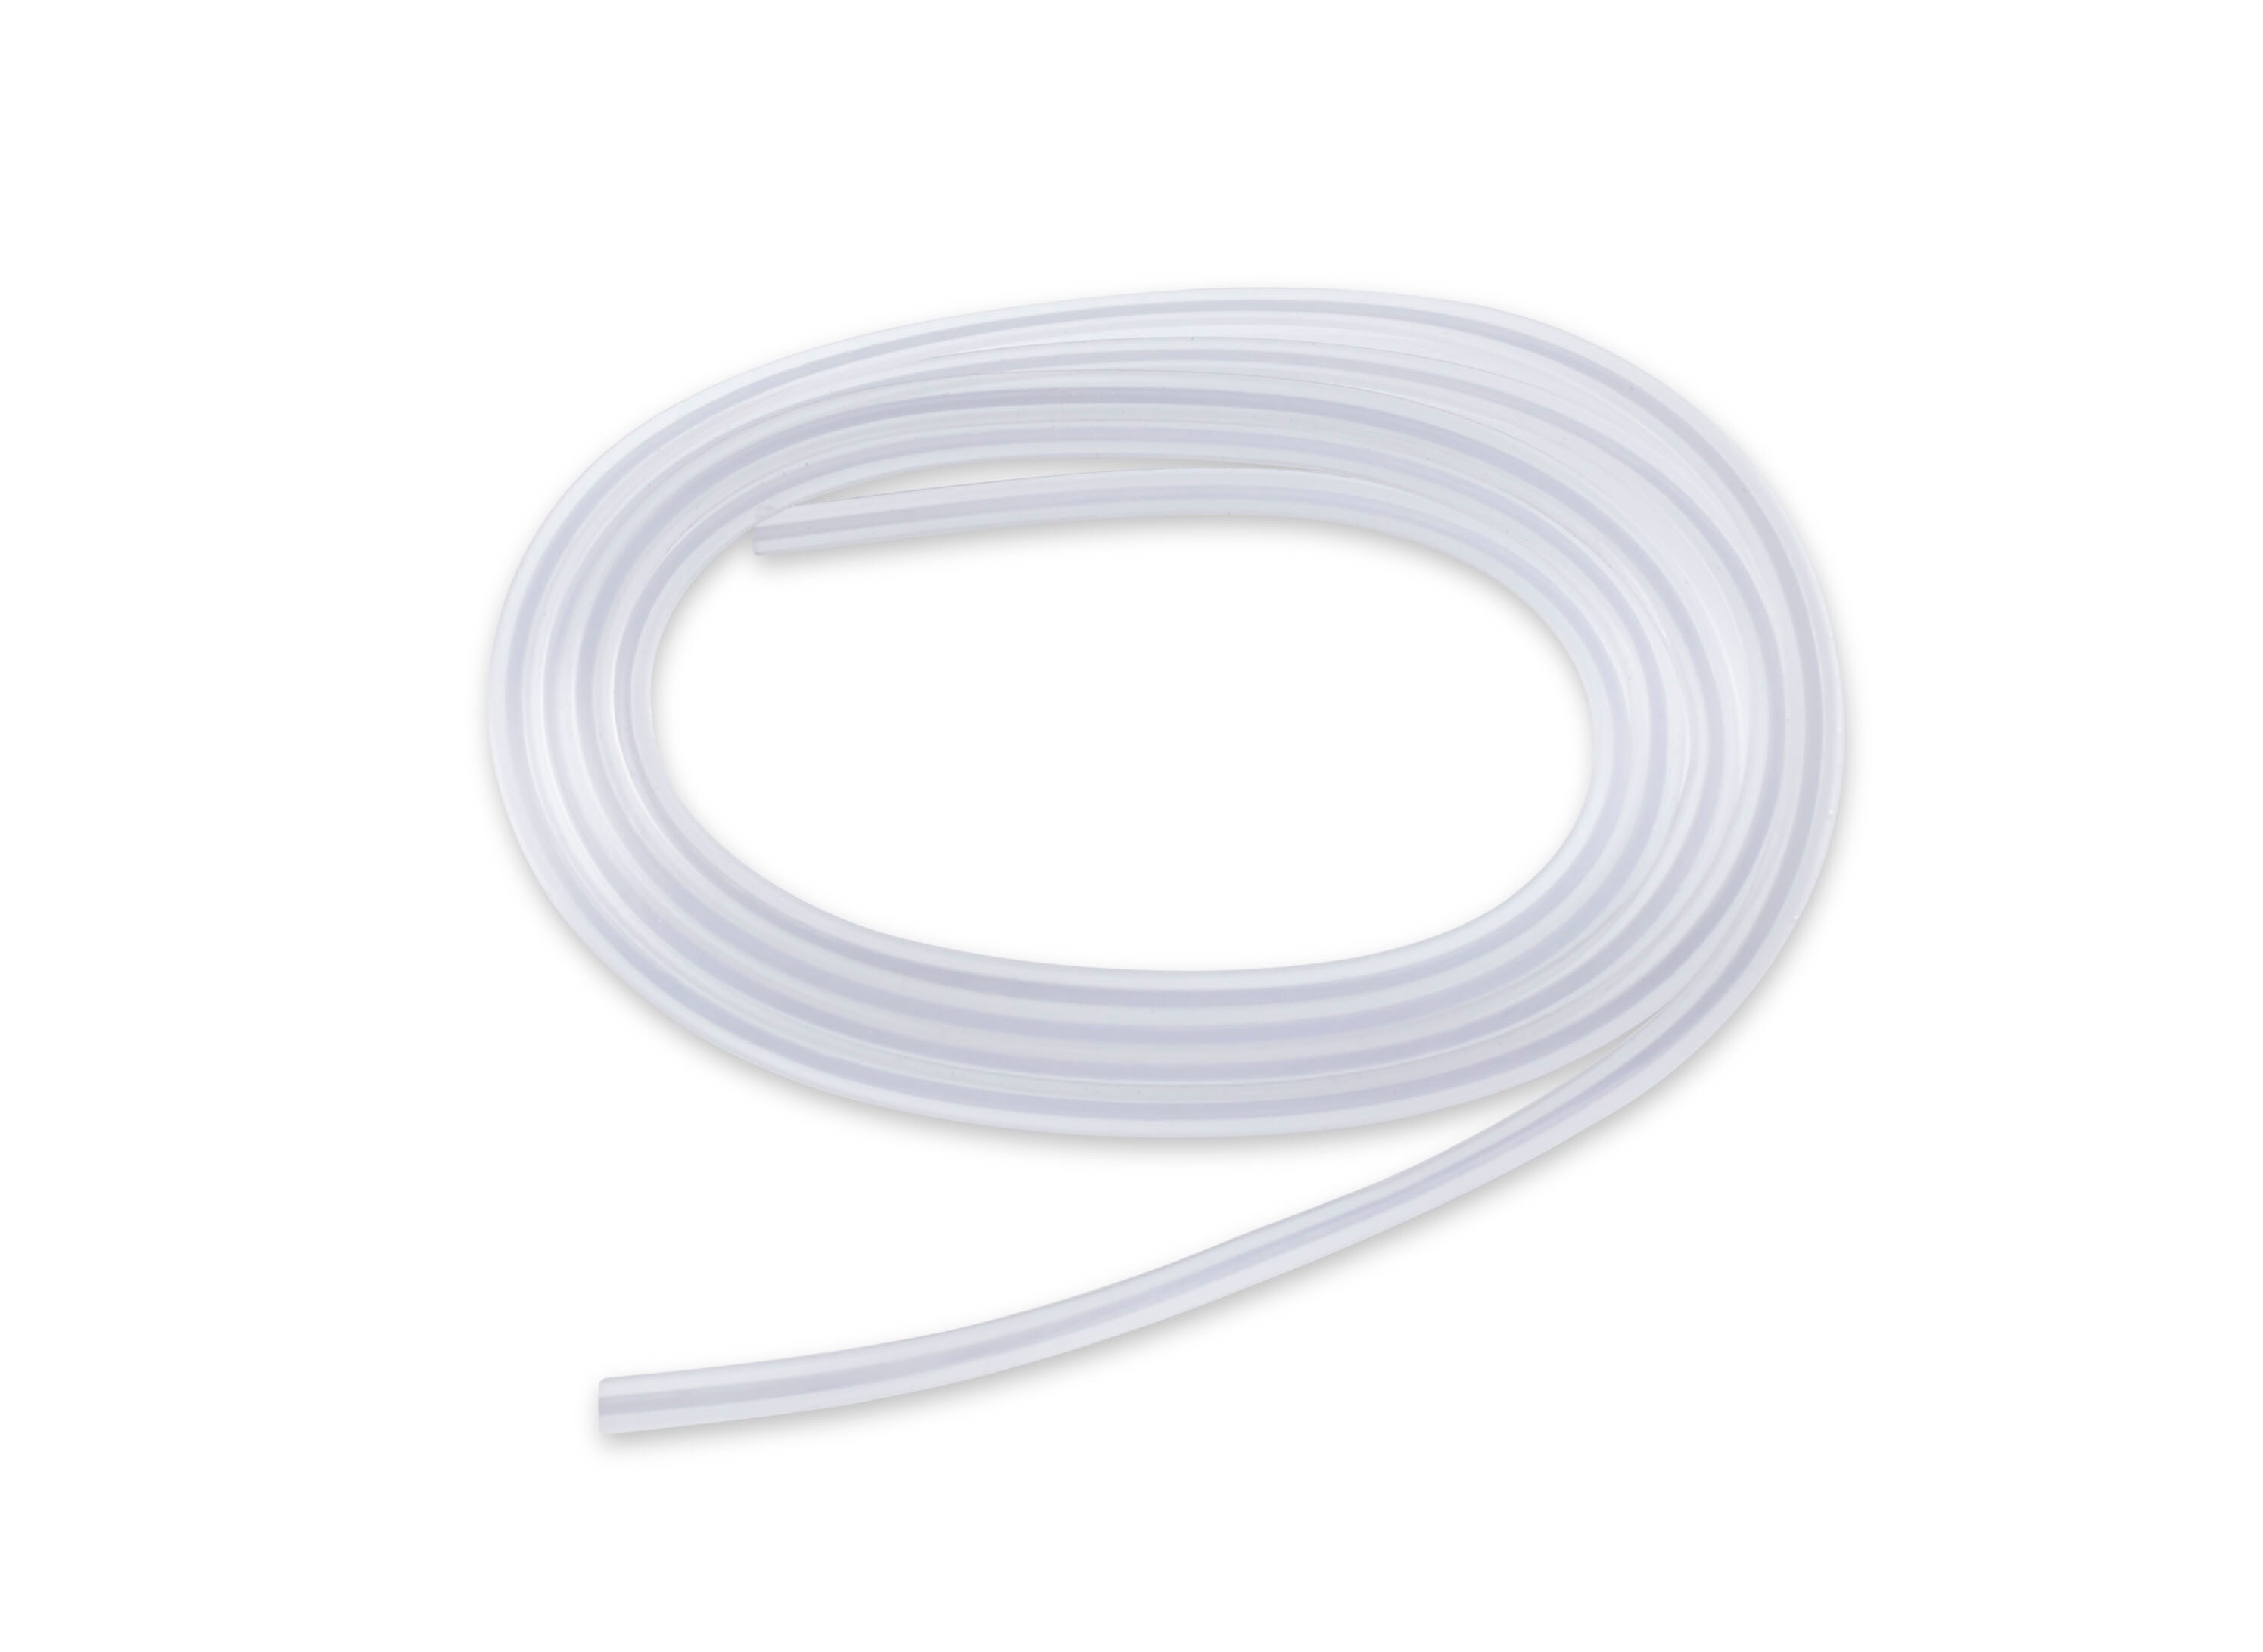 Water Stripping Strip for Shower Door Bottom Seal 24-Inch Clear Vynil 